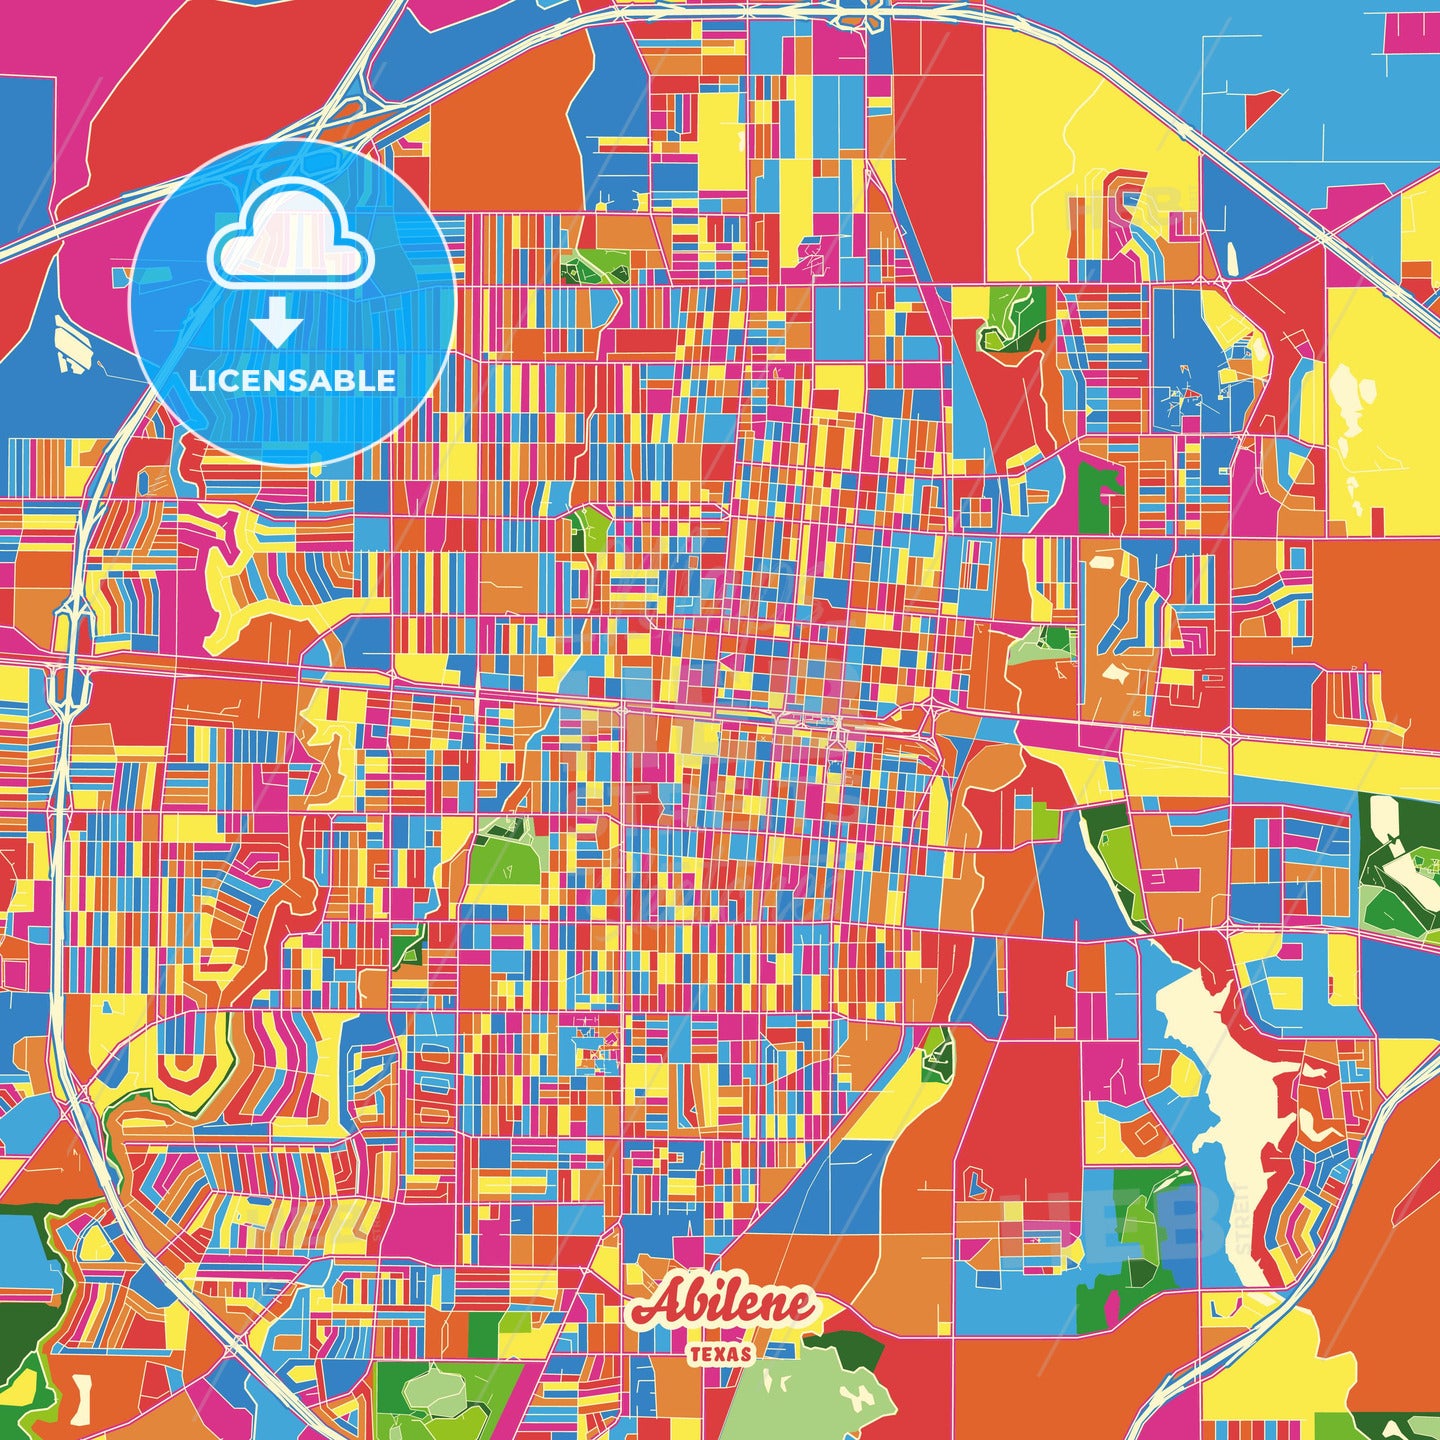 Abilene, United States Crazy Colorful Street Map Poster Template - HEBSTREITS Sketches